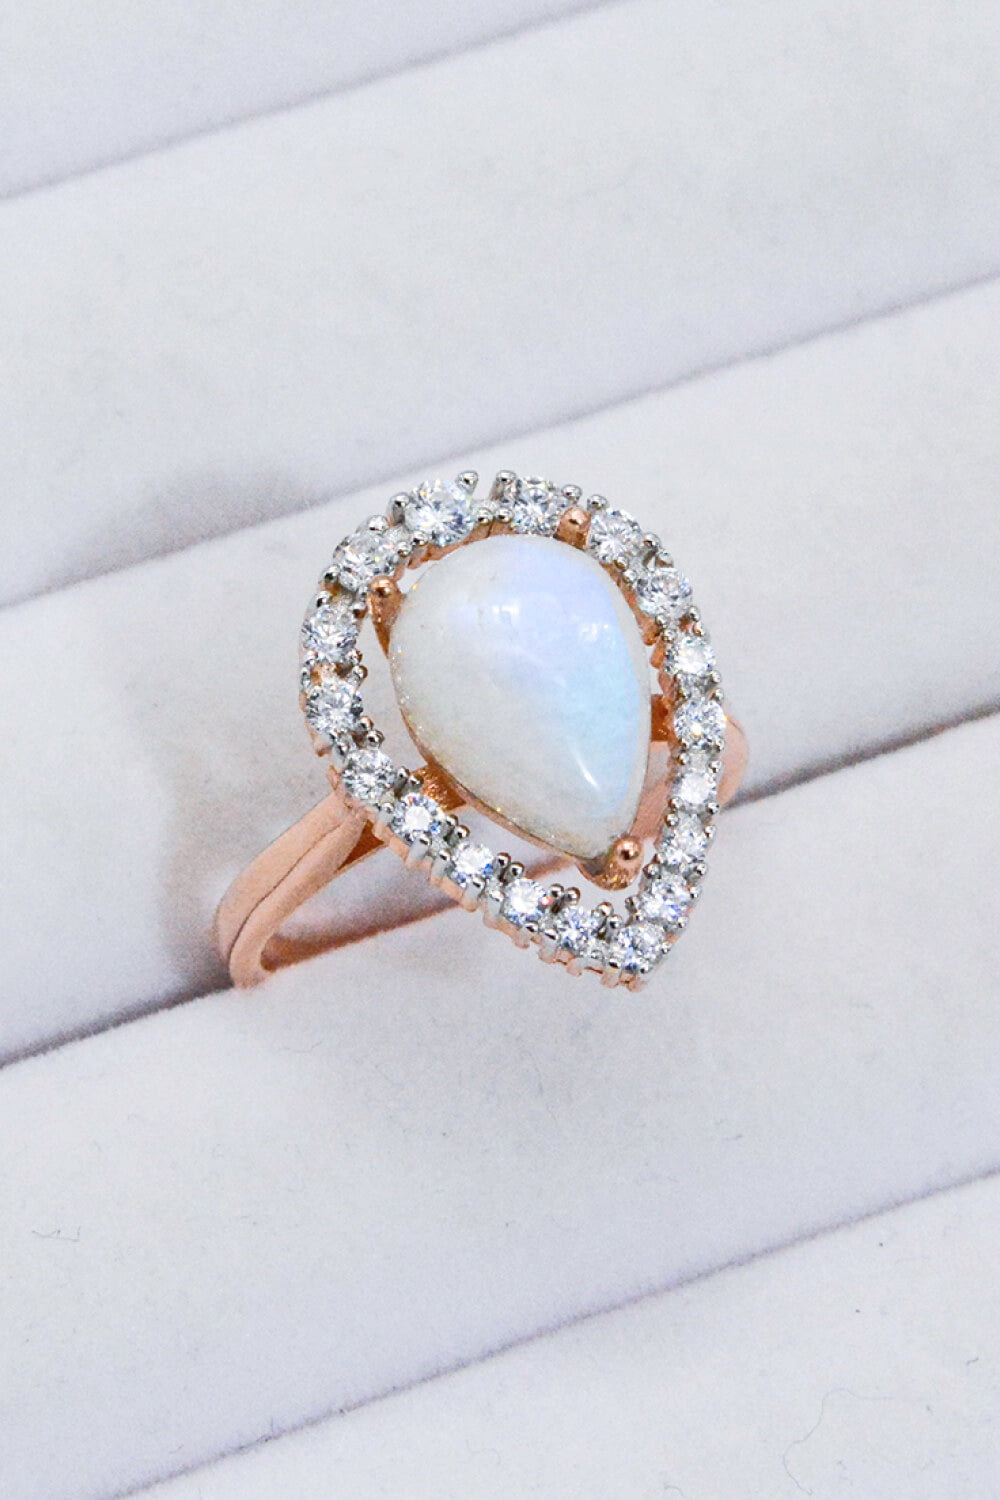 Moonstone Teardrop-Shaped 925 Sterling Silver Ring - Cheeky Chic Boutique